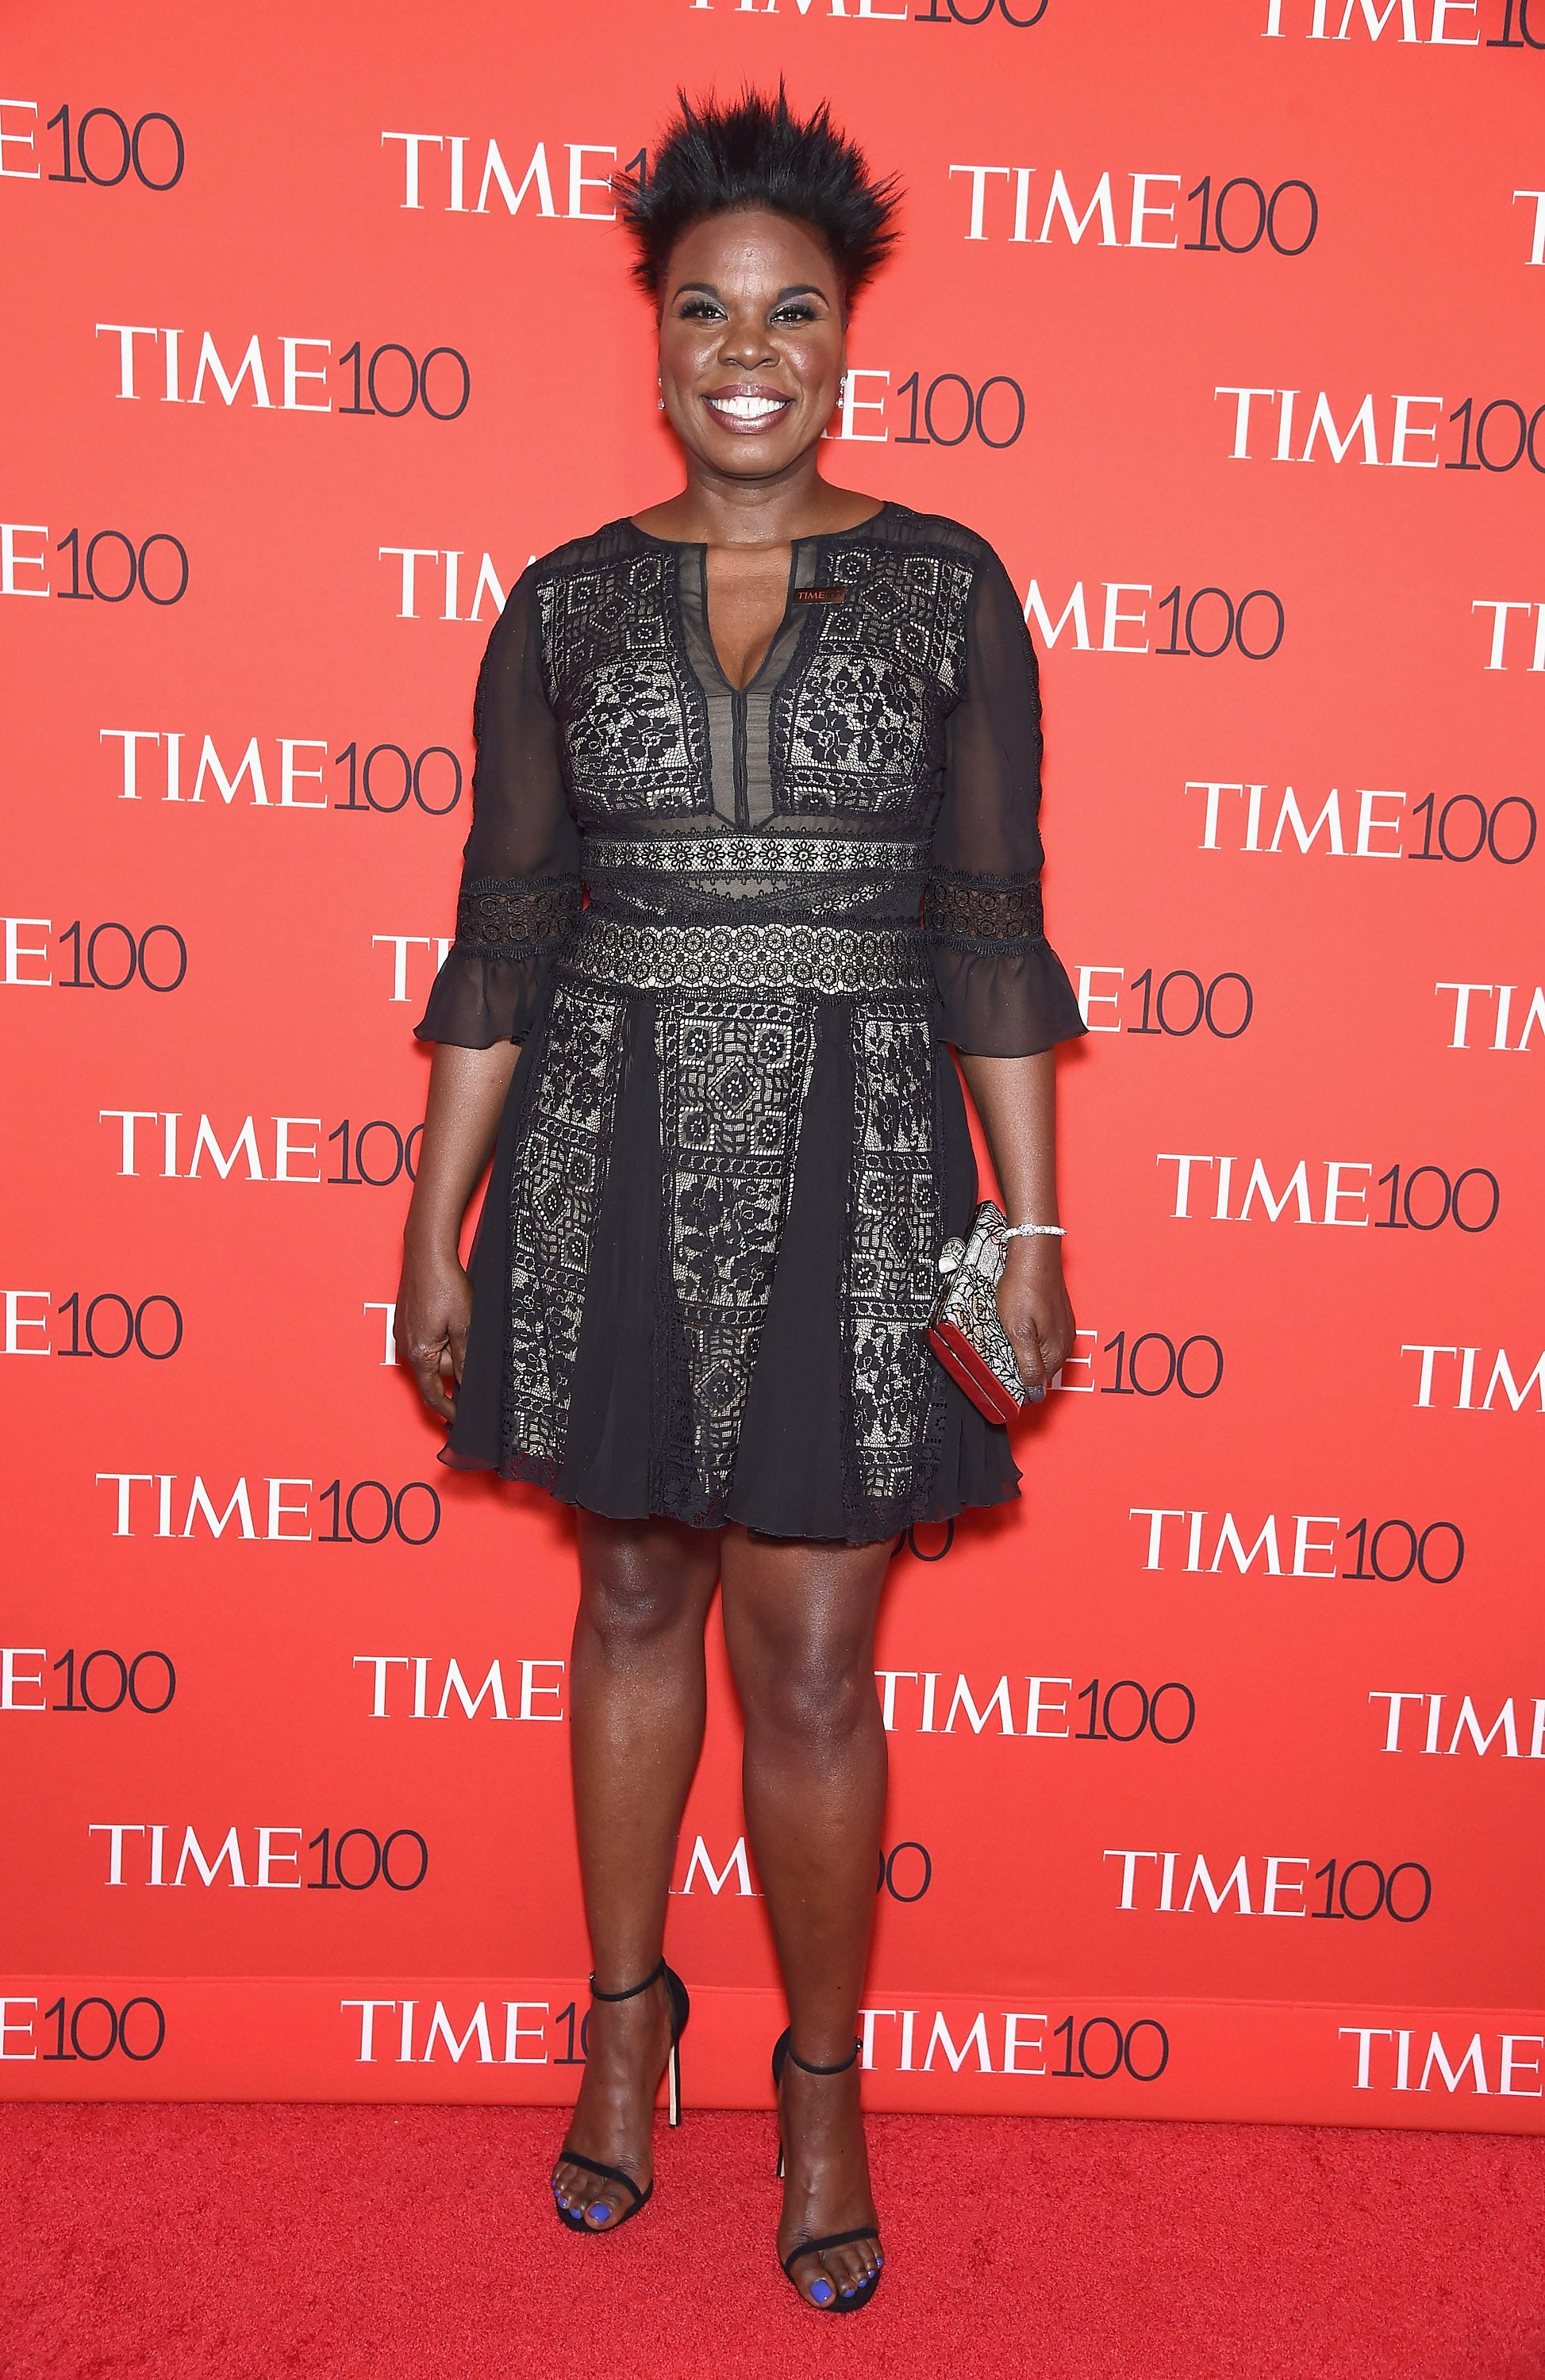 Celebrities Put Their Best Foot Forward At The 2017 TIME 100 Gala 
